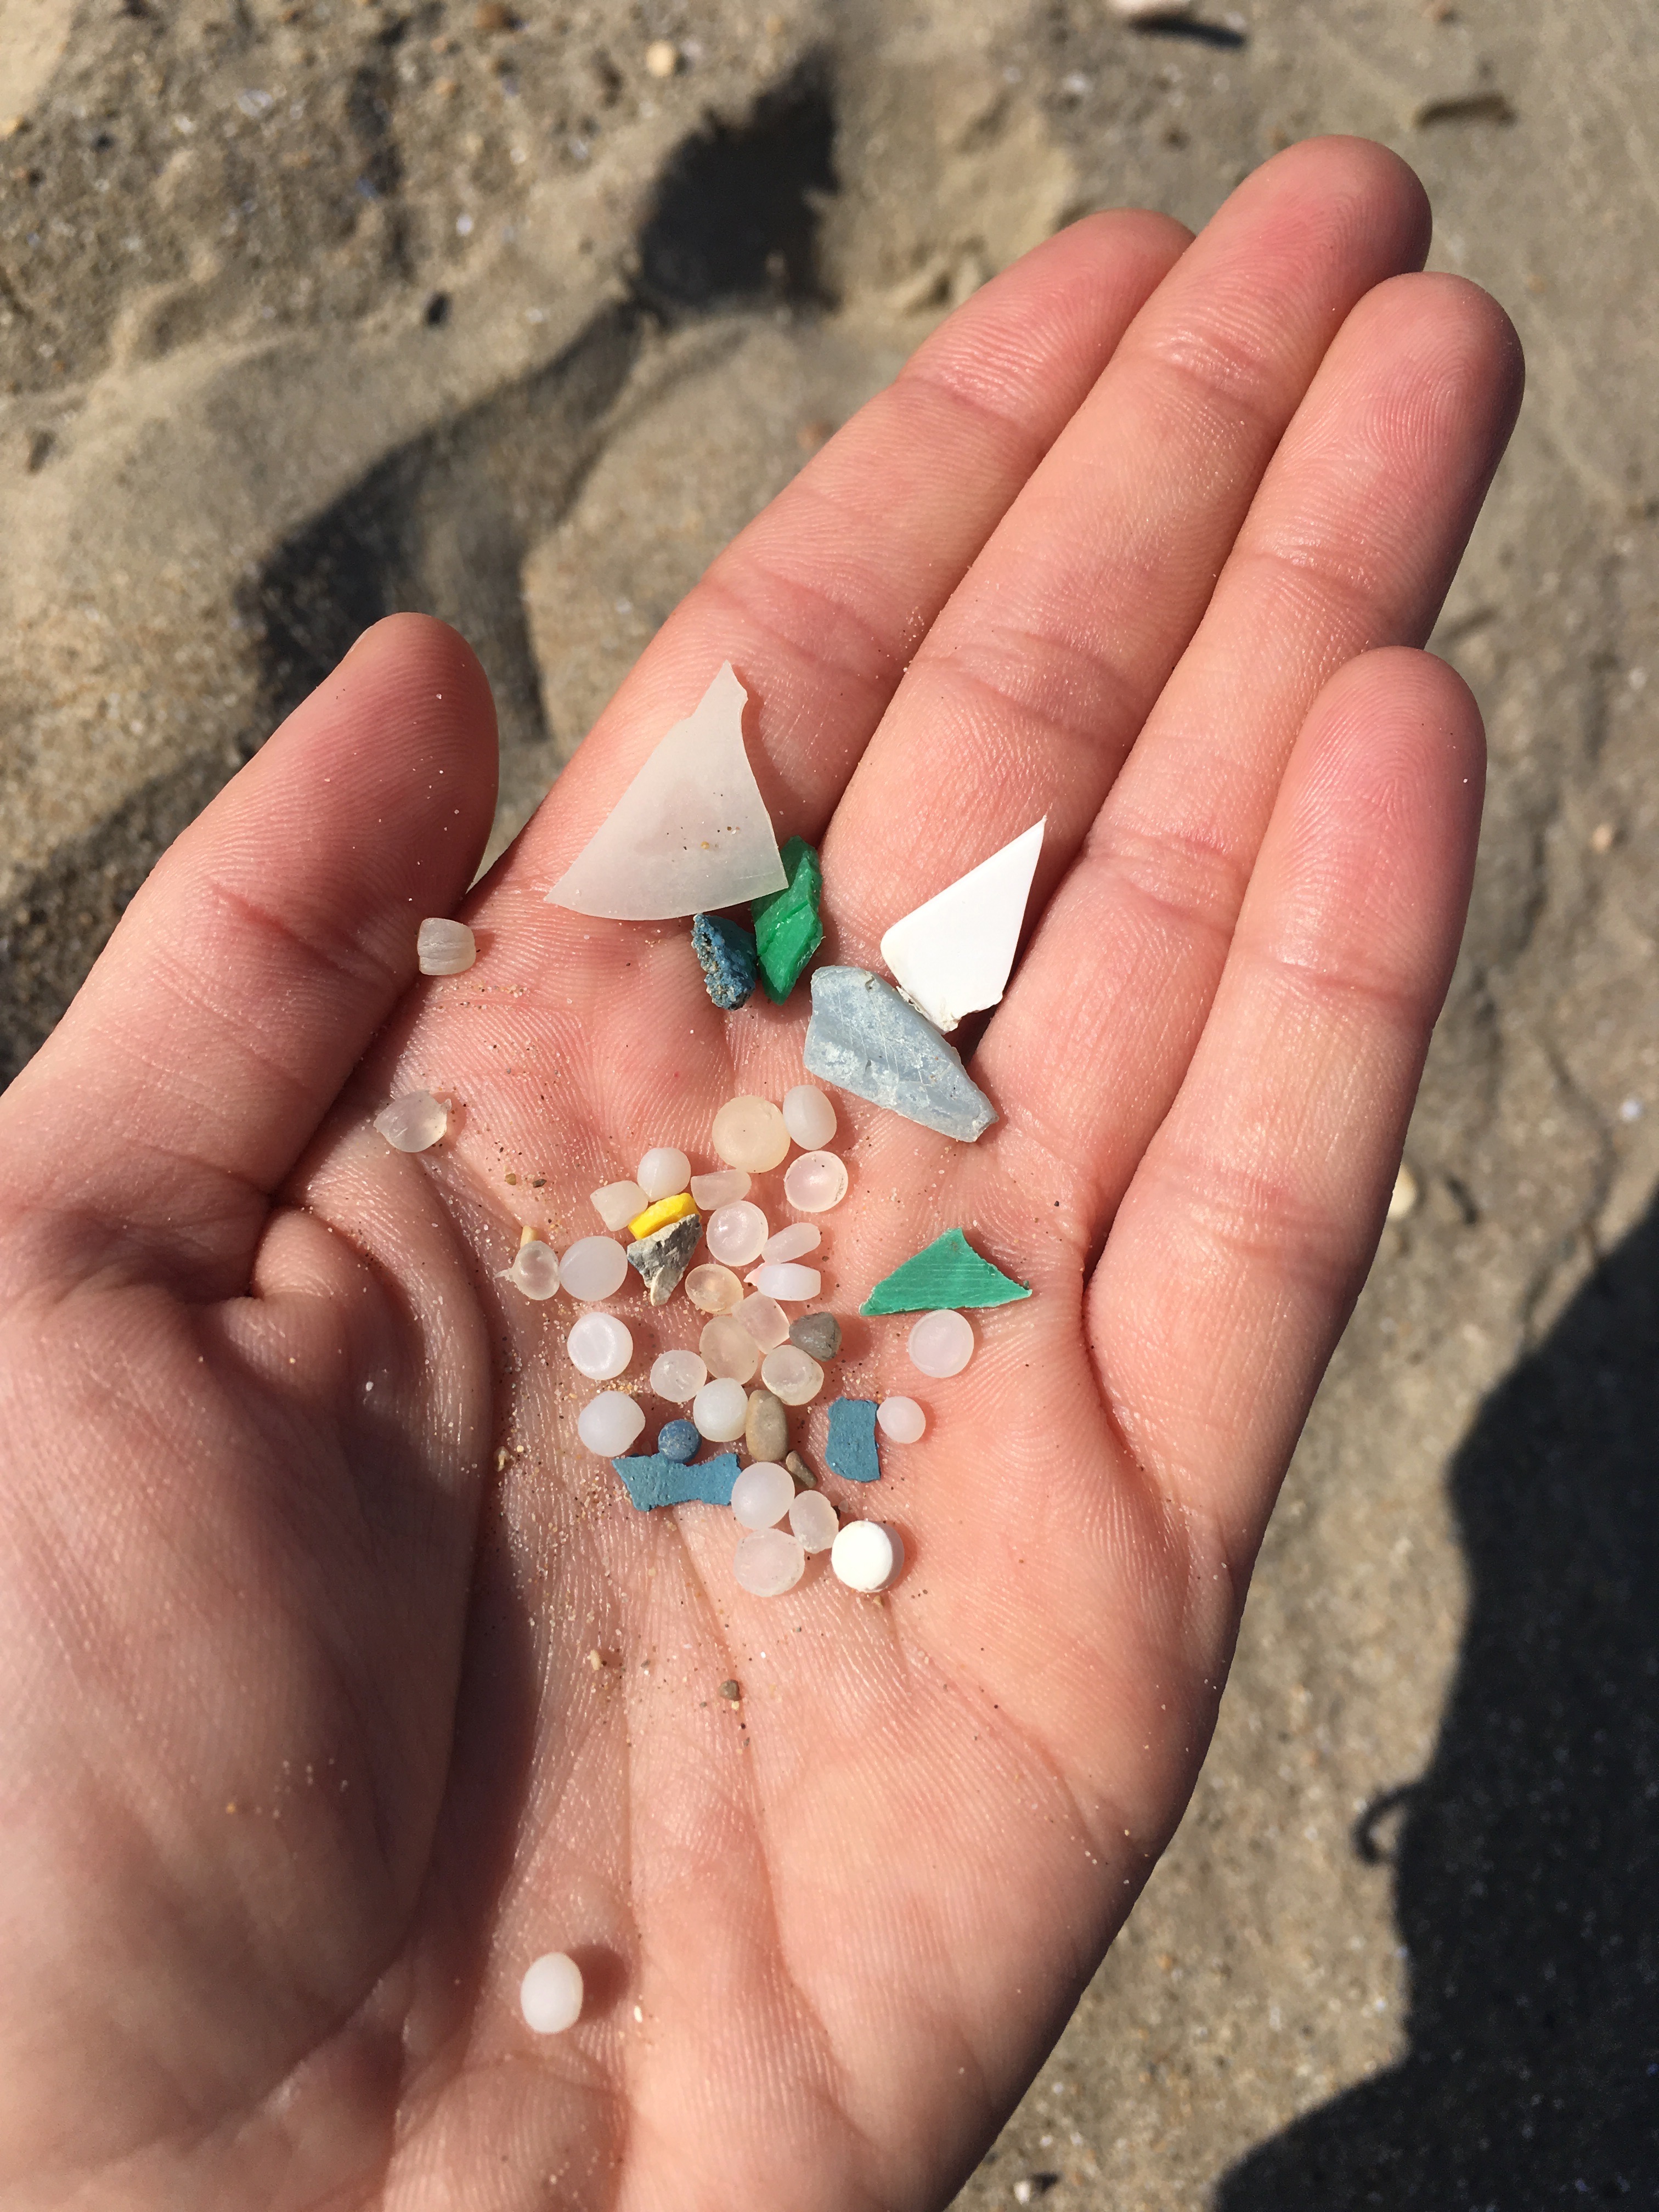 microplastics and small fragments collected during the SRAP campaign